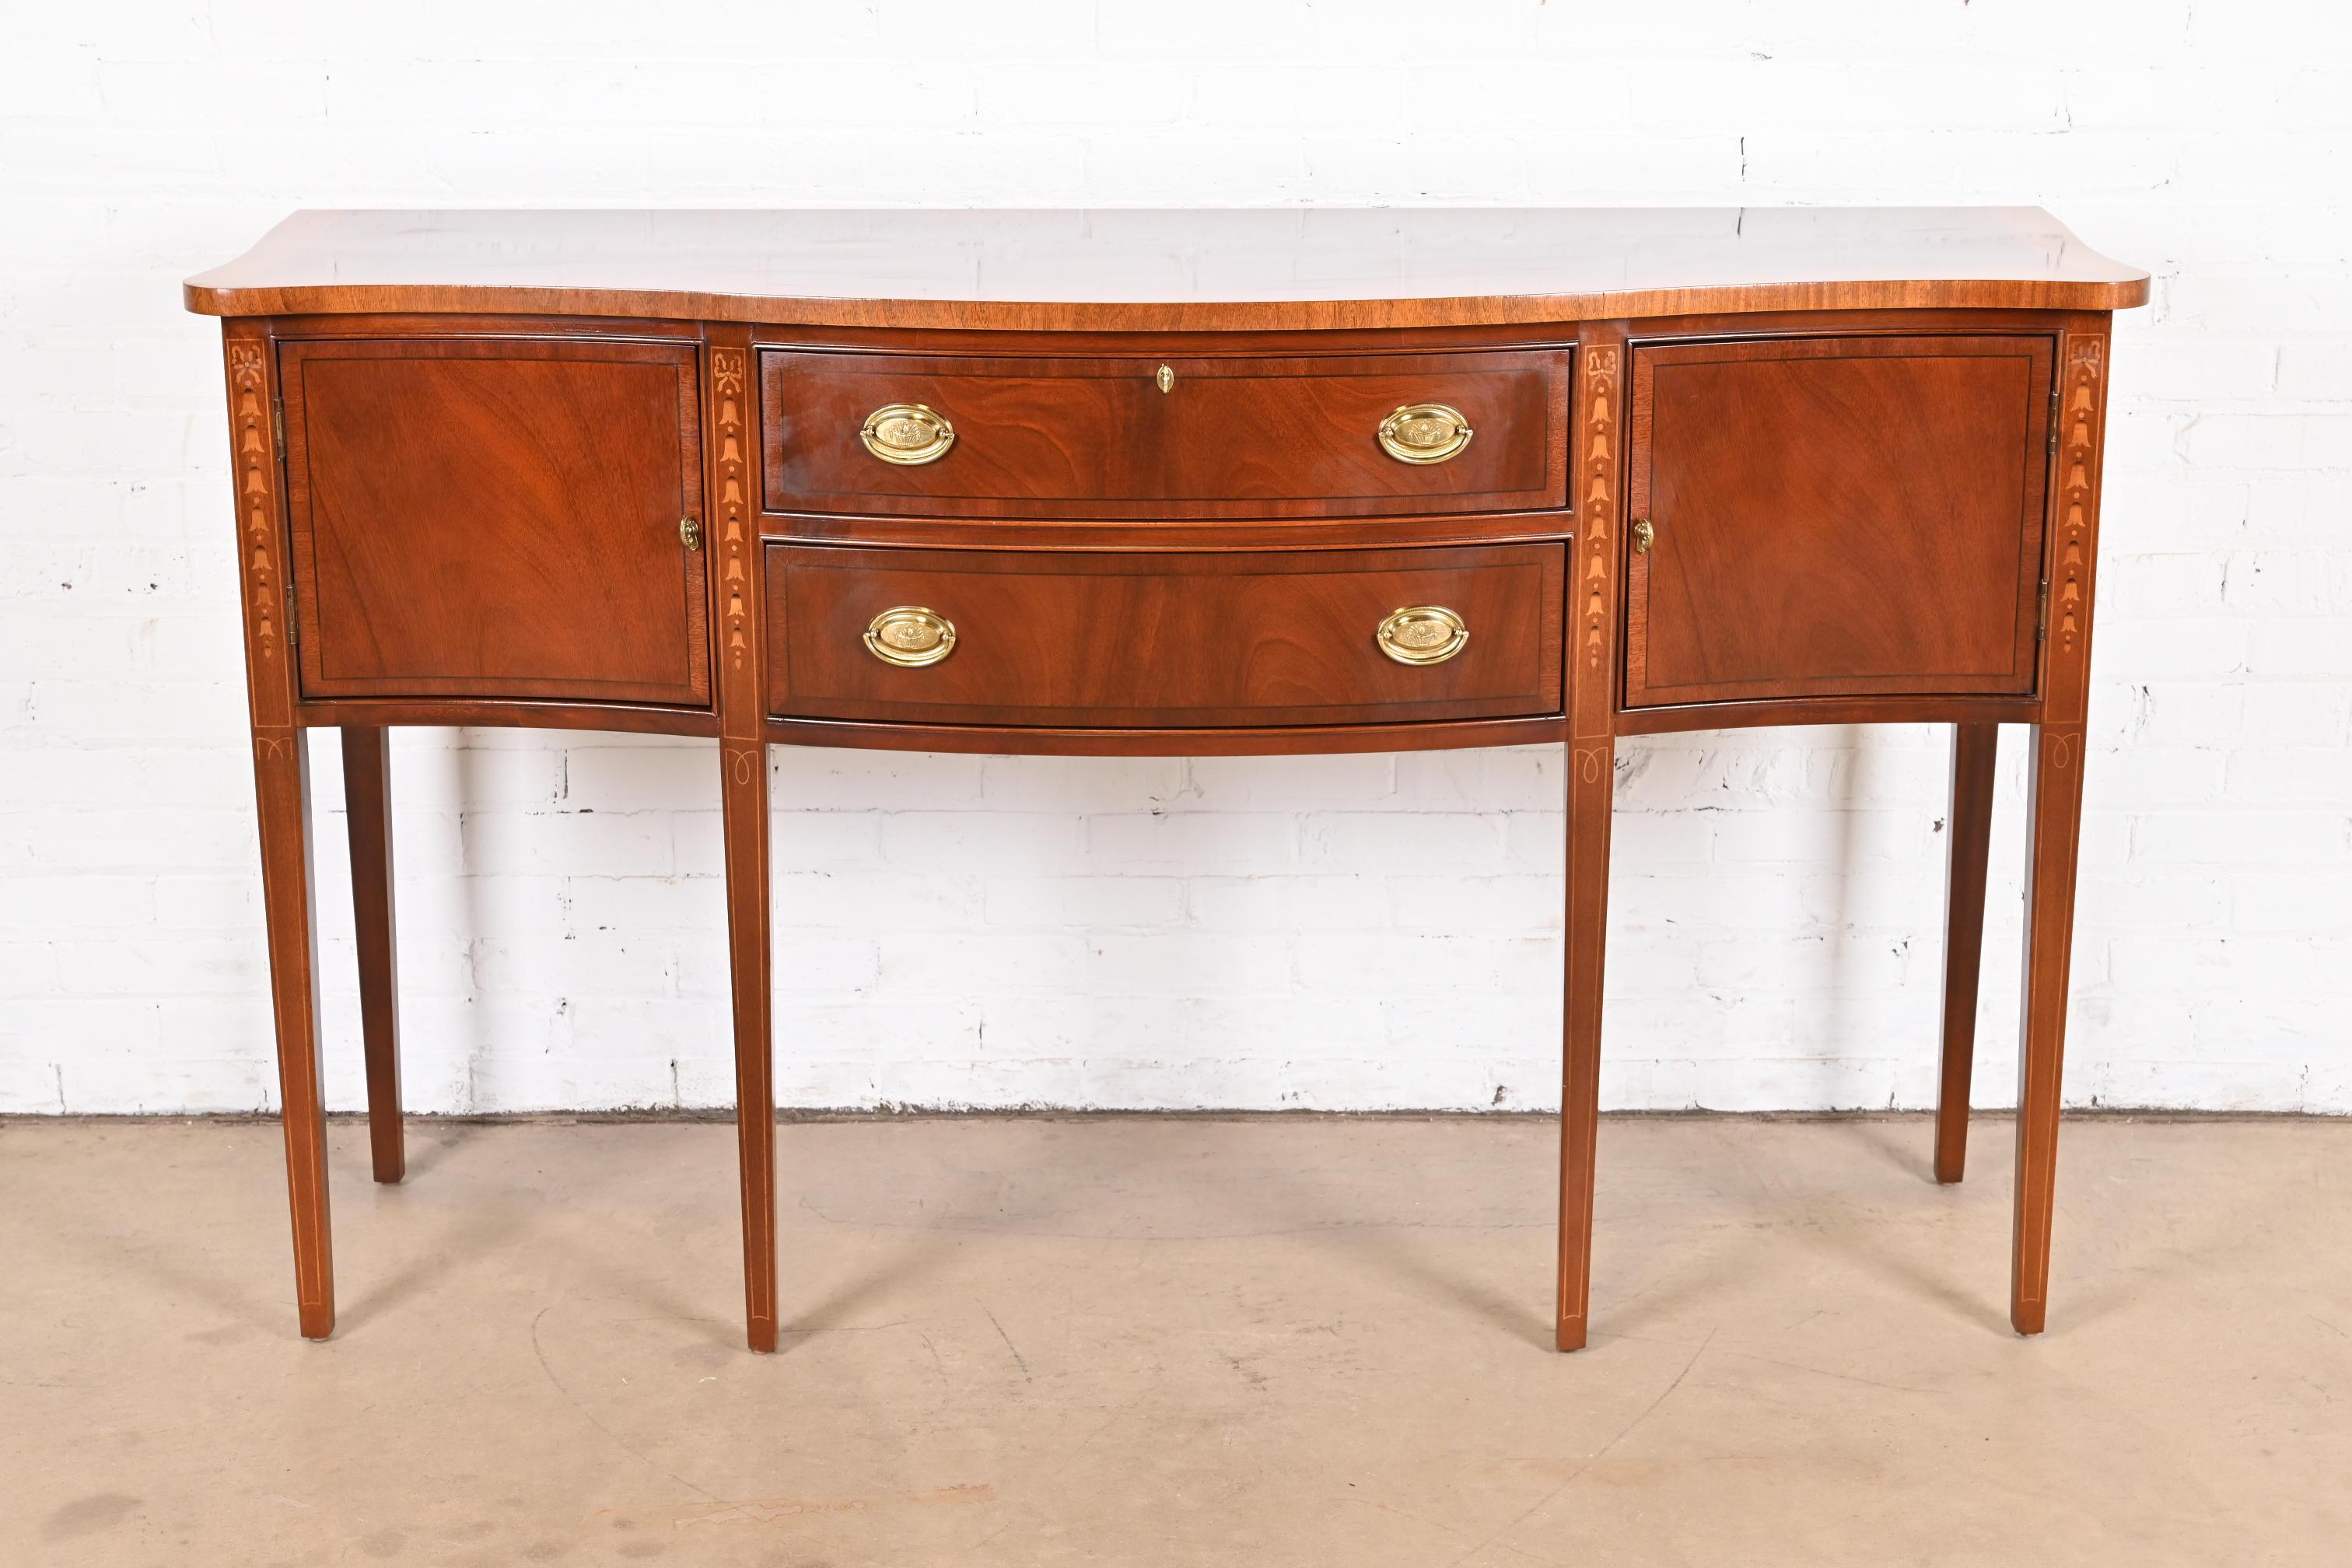 A gorgeous Hepplewhite or Federal style serpentine front sideboard, buffet, or credenza

USA, Late 20th Century

Flame mahogany, with inlaid satinwood marquetry and banding, and original brass hardware. Top drawer locks, and key is